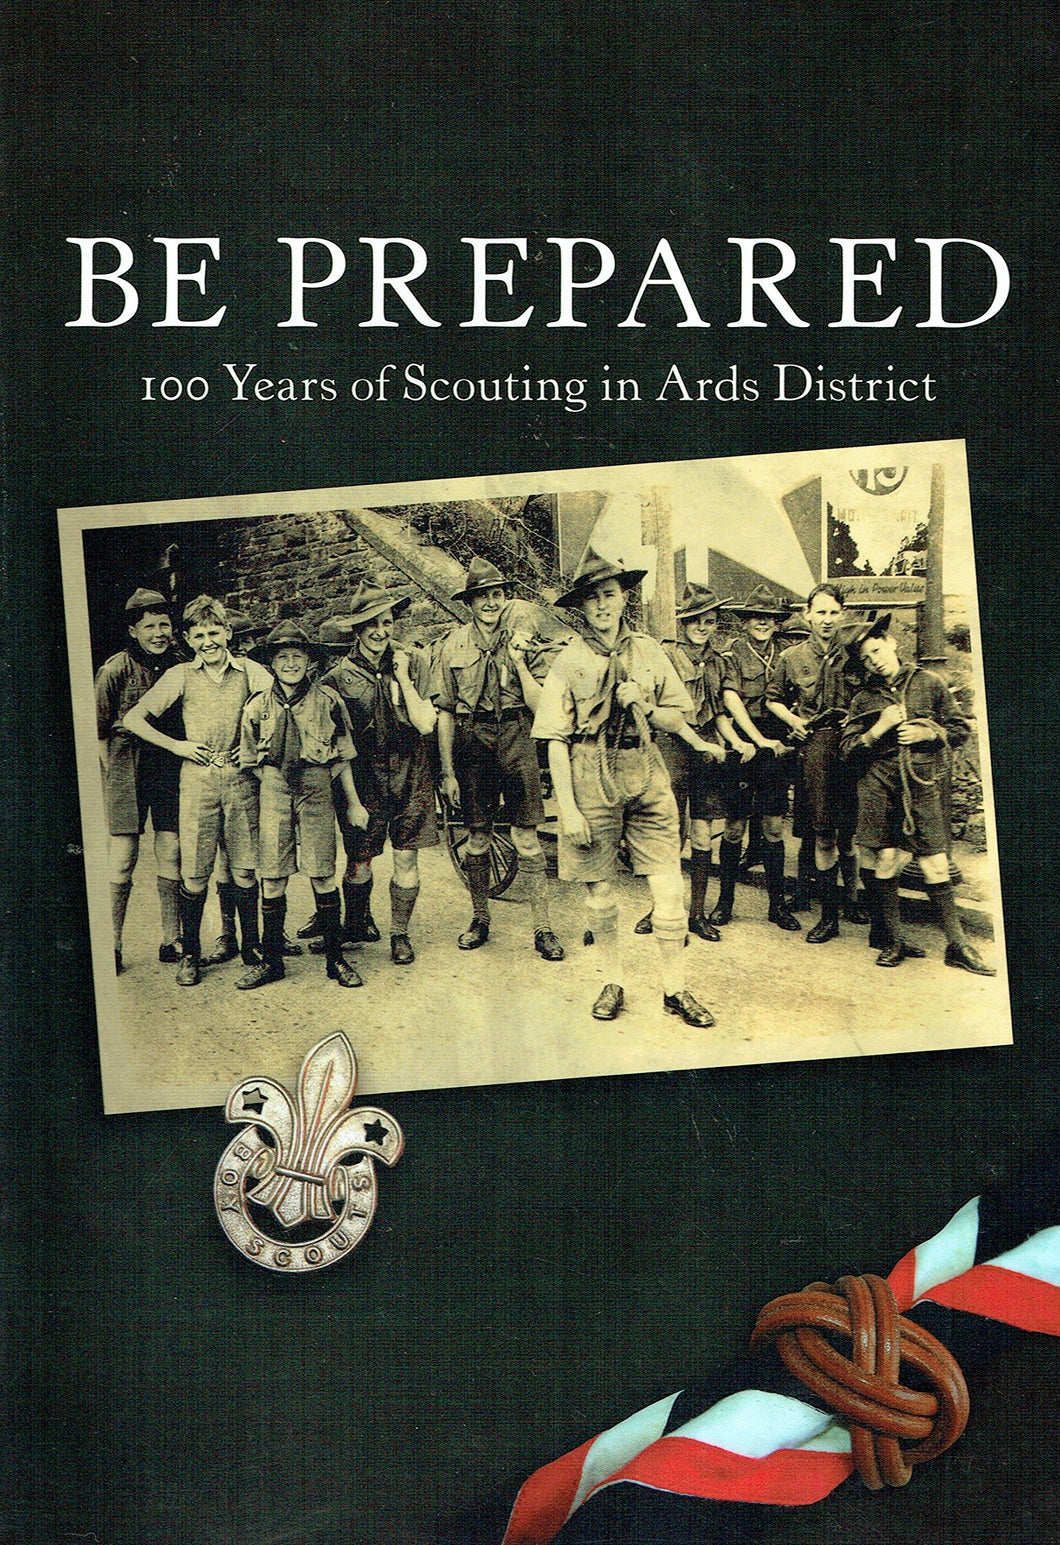 Be Prepared 100 Years of Scouting in Ards District